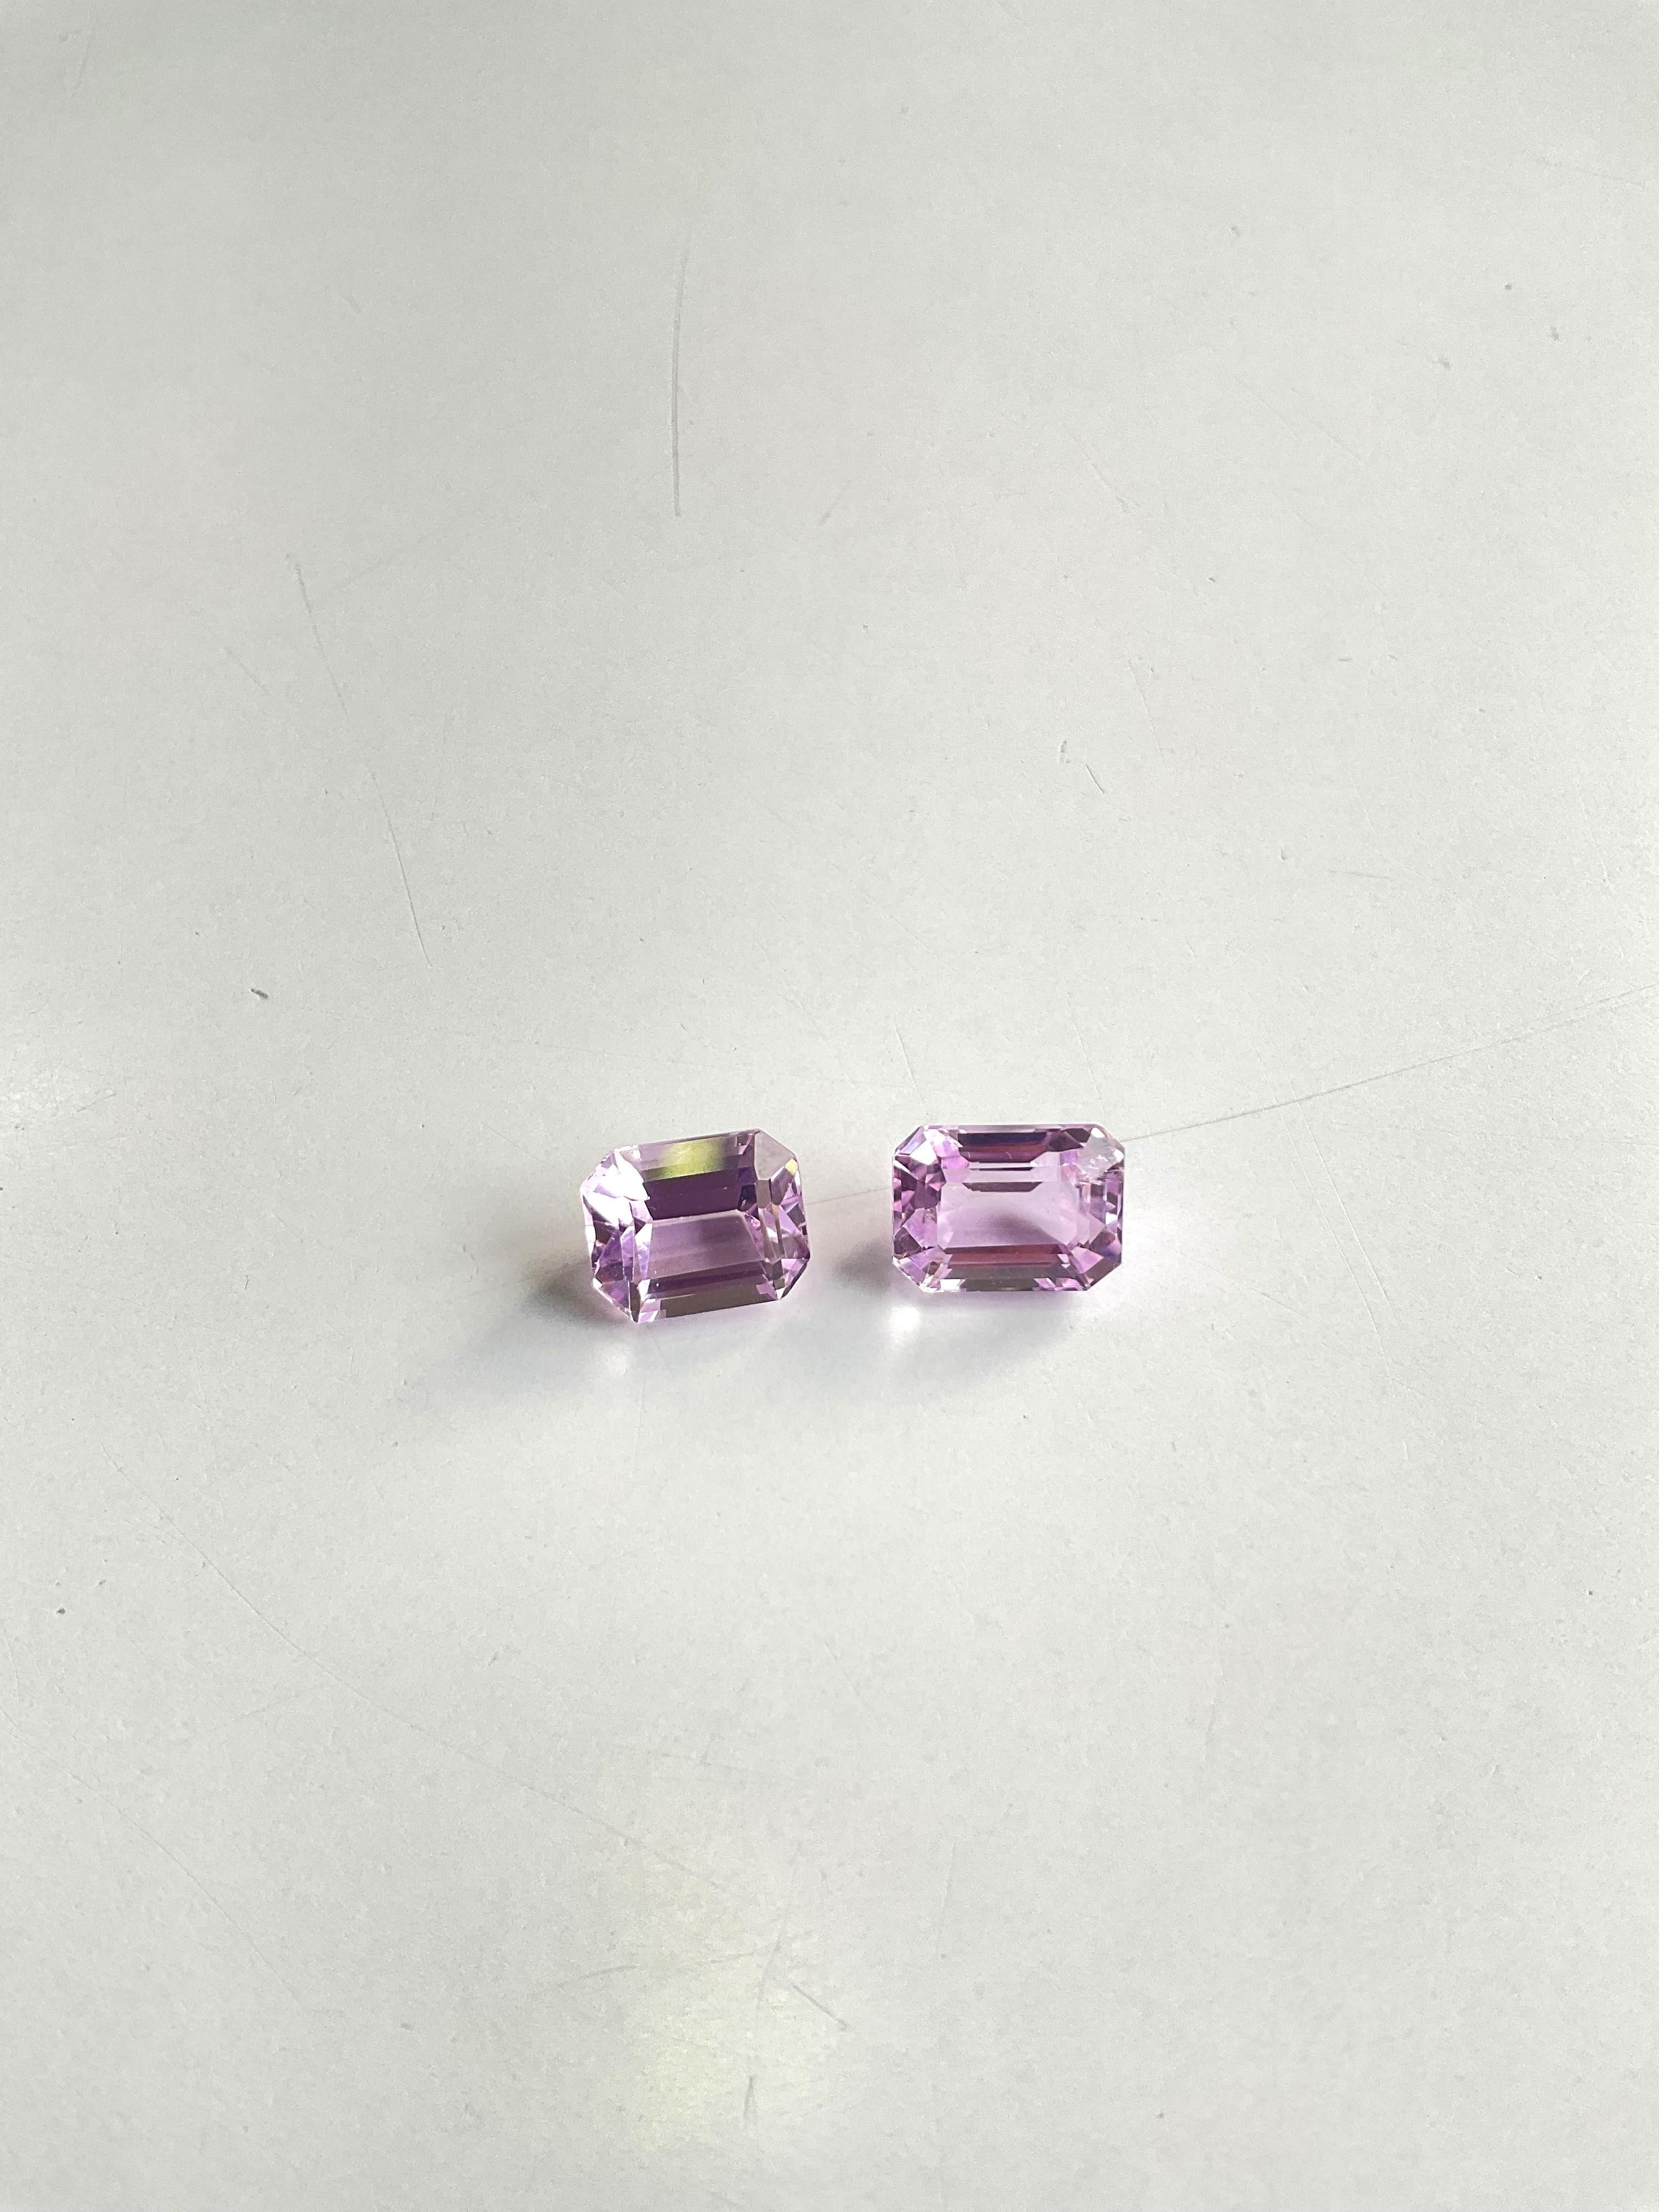 This piece is in a sweet bright pink, the unique cutting style, can be an interesting material for eye-catching jewelry
14.28 Carats Pink Kunzite Natural Cut Stones For Fine Gem Jewellery
Weight: 14.28 Carats
Size - 11.5x9x7 To 12x9x7.5 MM
Pieces: